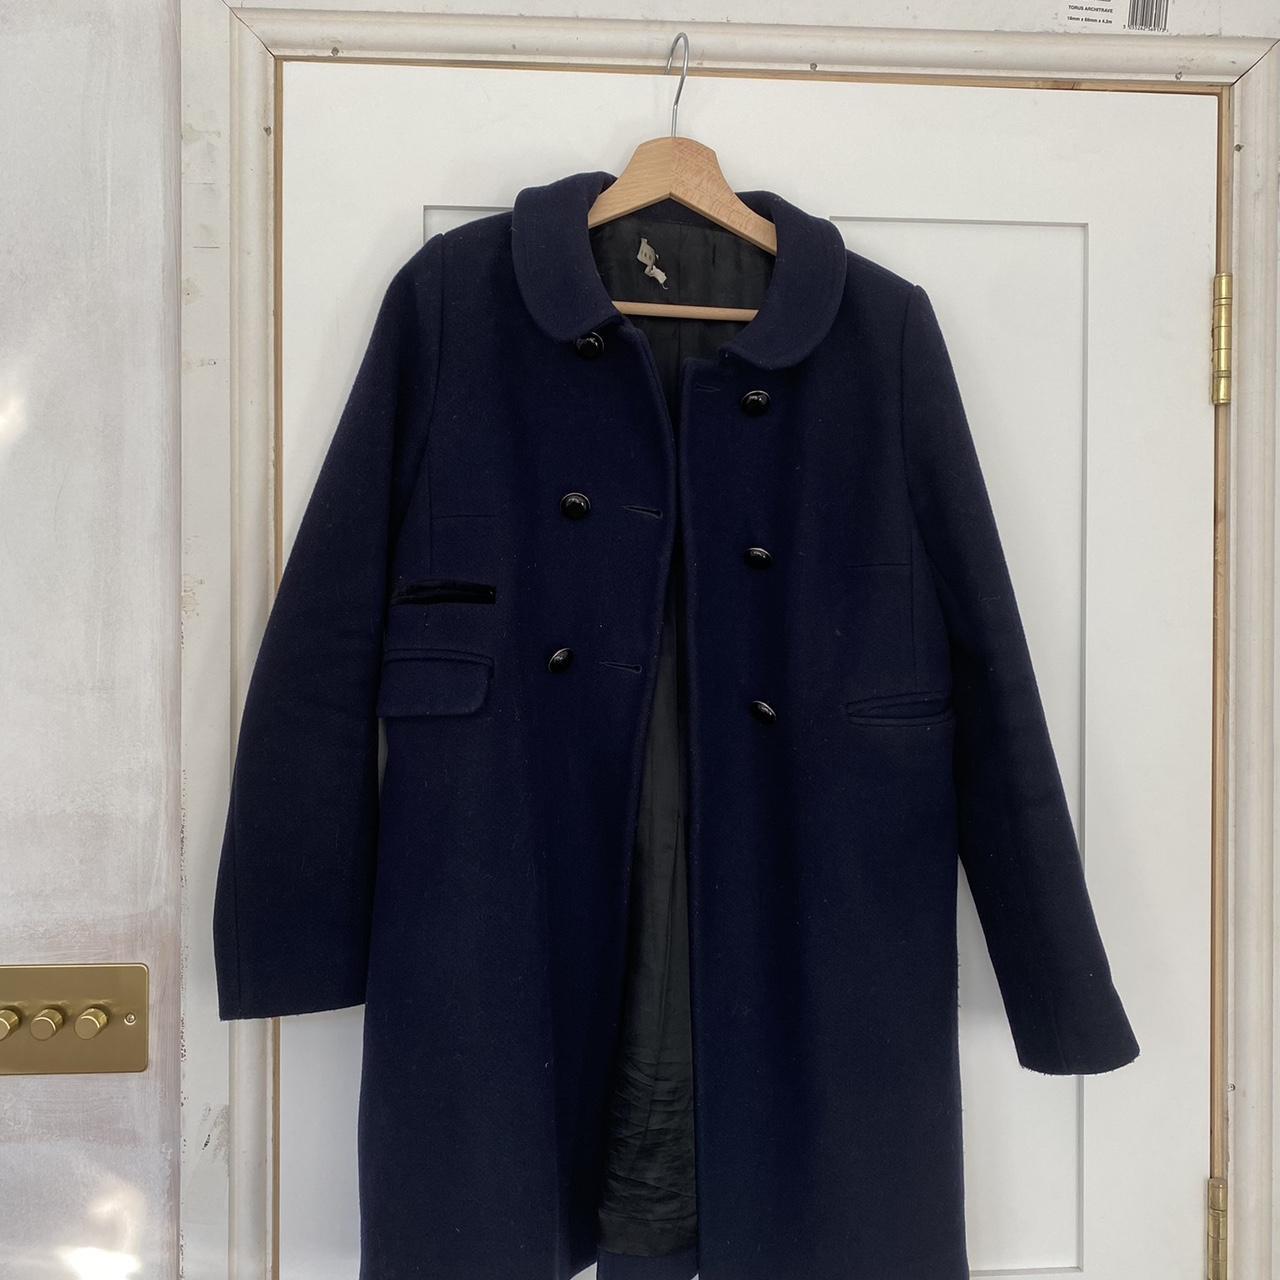 Sandro navy pea coat with. Mack and gold buttons,... - Depop